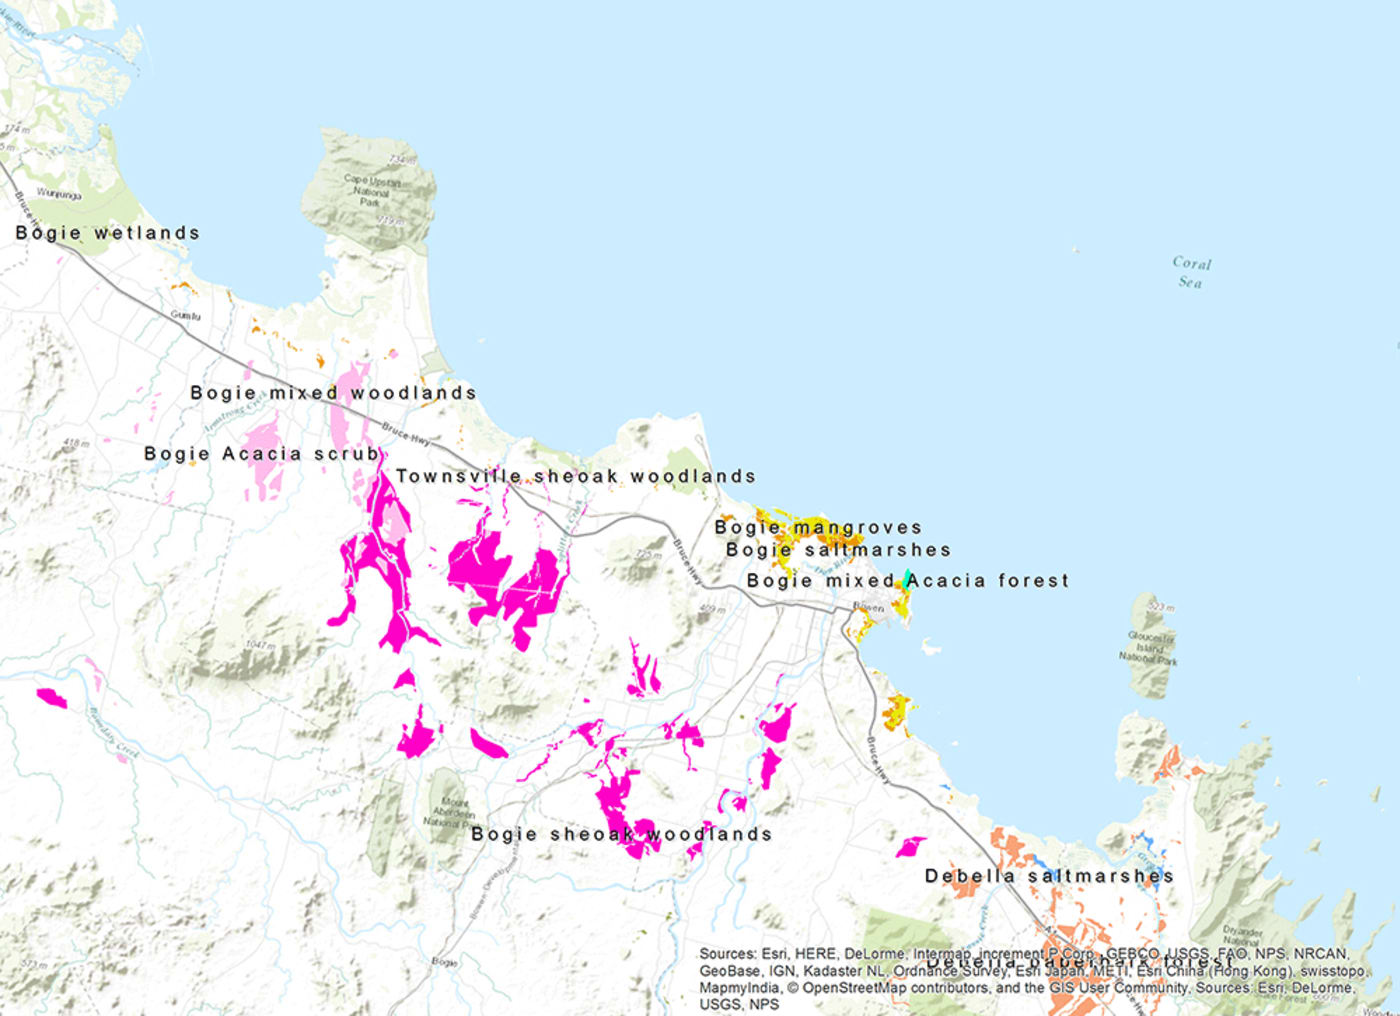 Map of unprotected ecosystems in Bowen region